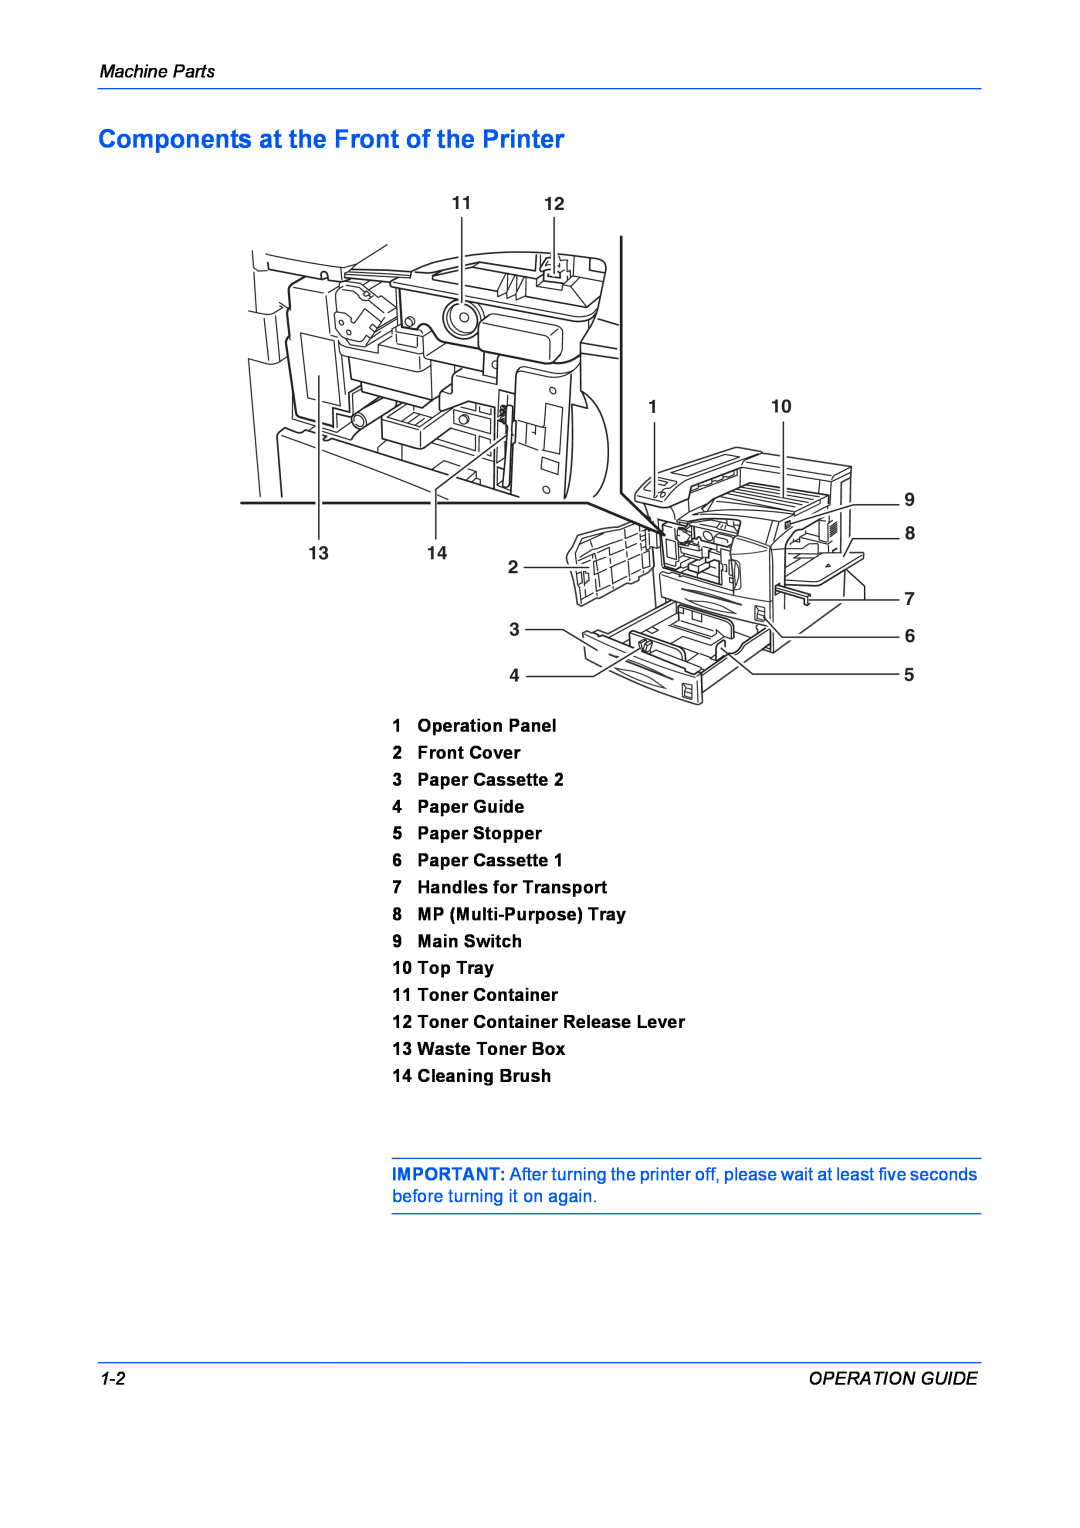 Kyocera FS-9530DN, FS-9130DN manual Components at the Front of the Printer, 1112 110 1314, Machine Parts, Operation Guide 